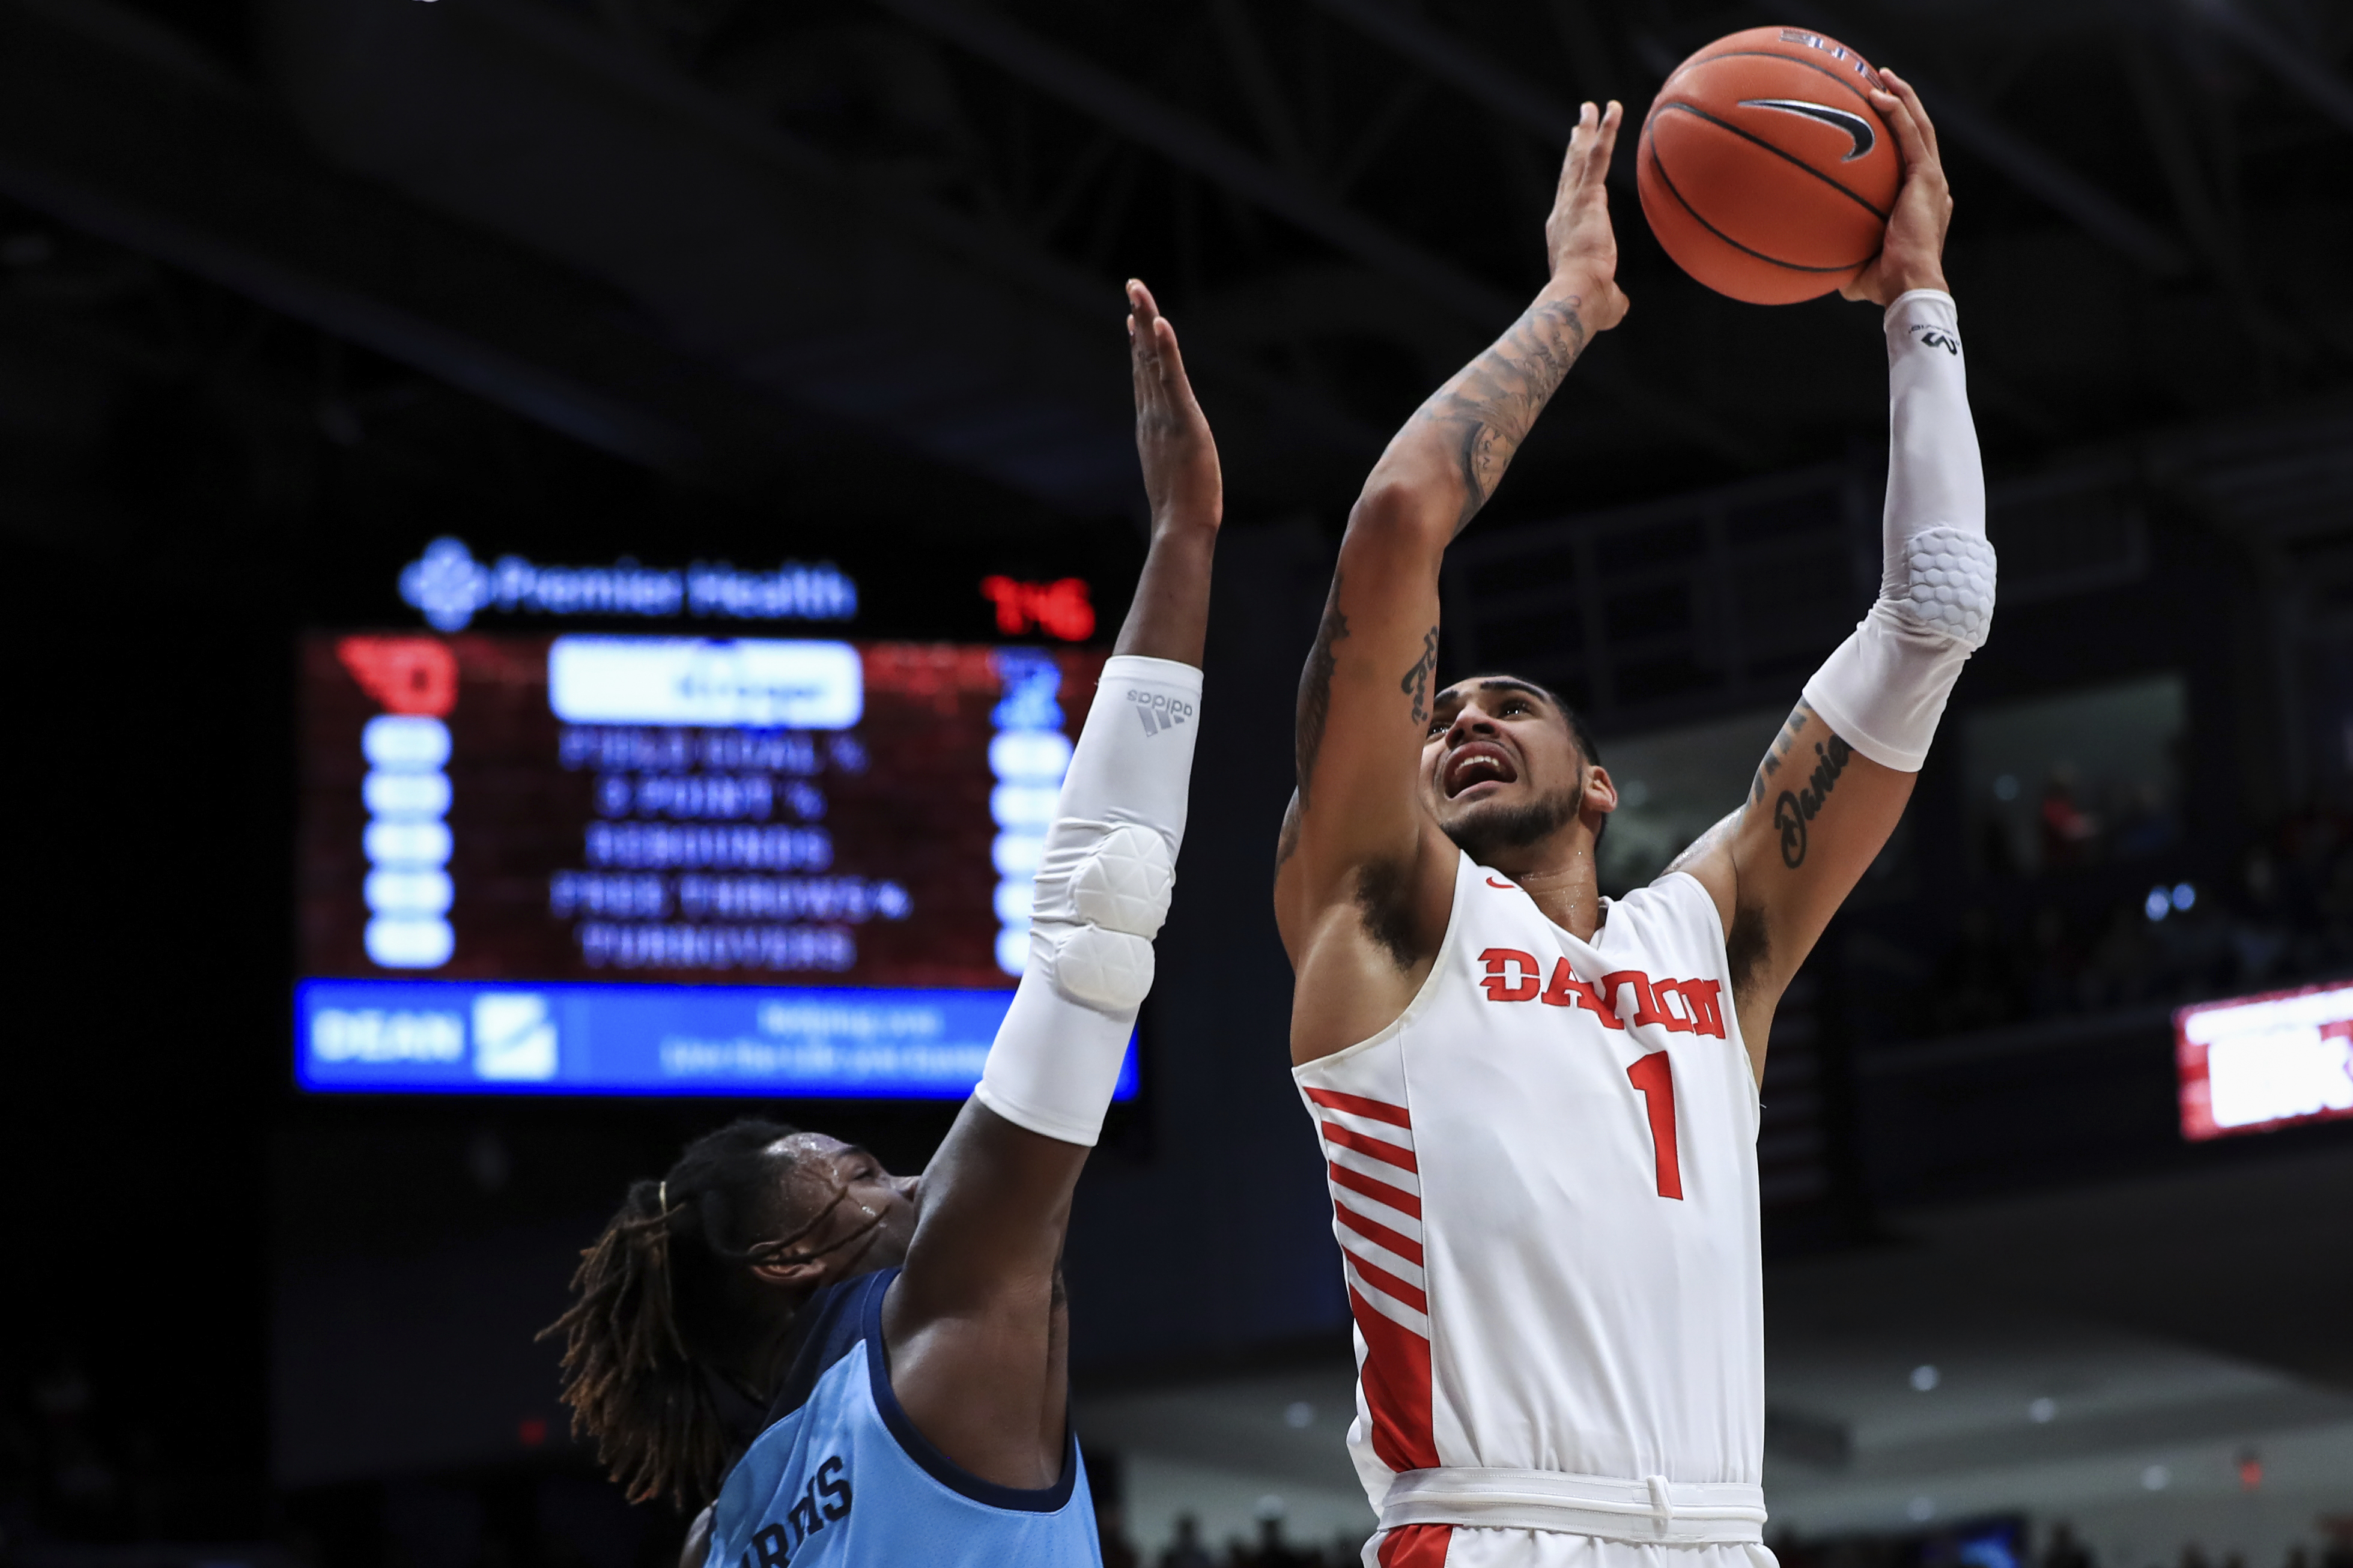 Toppin's 22 points lead No. 6 Dayton over Rhode Island 81-67